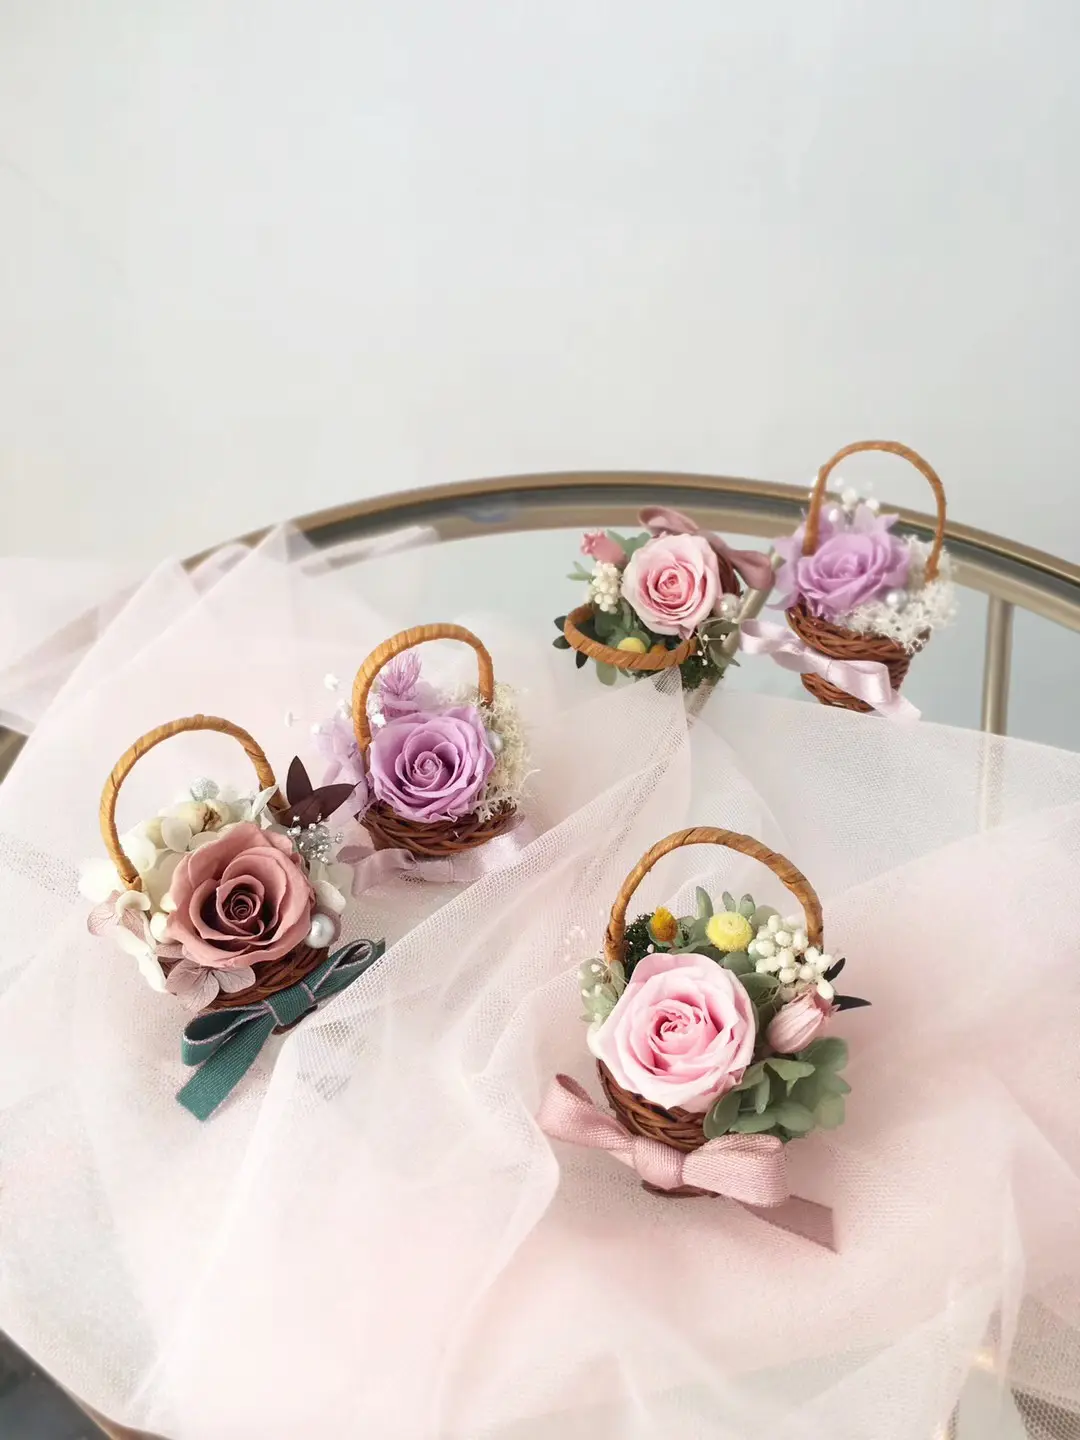 O-061 Hot Sale Wedding Home Decor Mini Preserved Flower Basket Dried Flower and Plants Bouquet